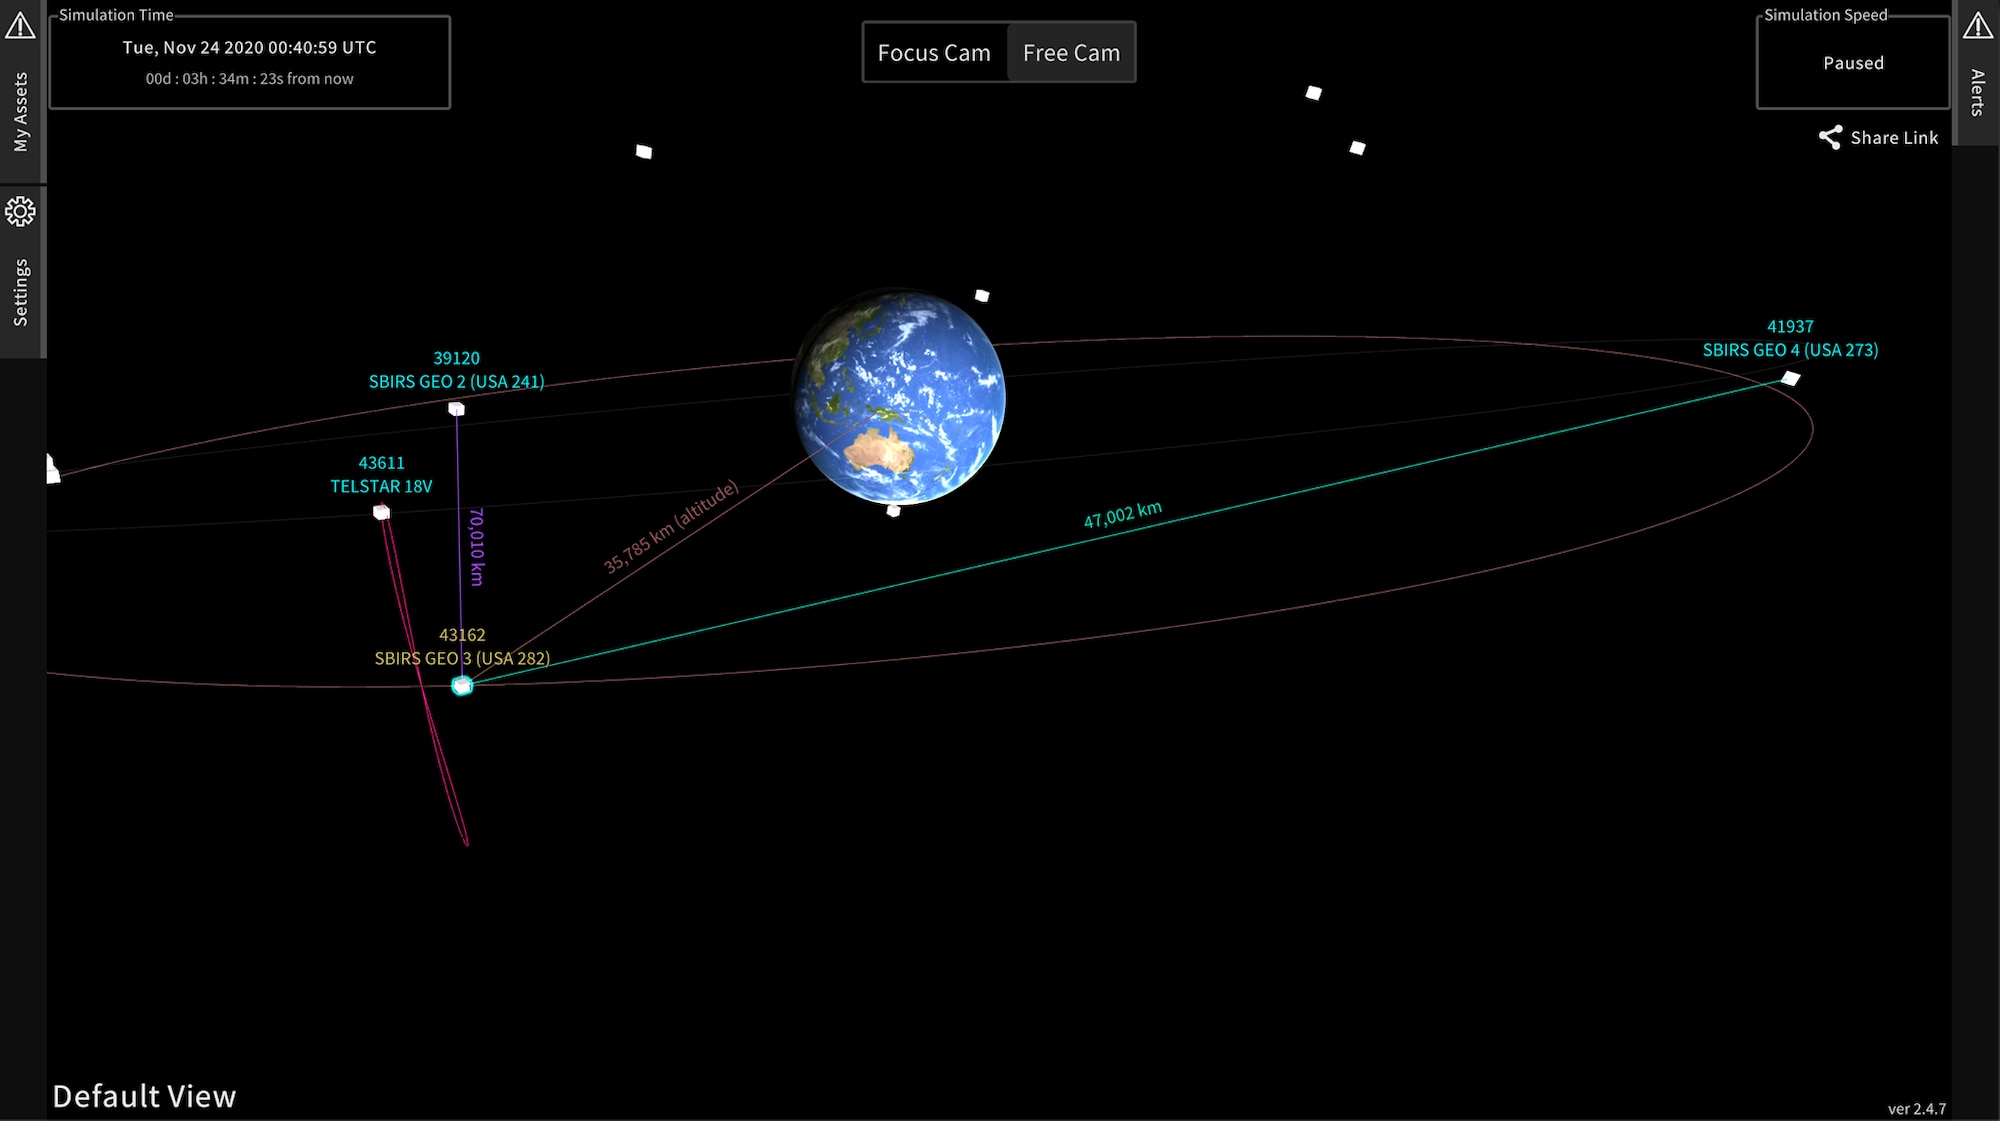 Space Cockpit is a situational awareness tool that allows satellite operators to visualize the satellites they control in a real-time, video game-like application. (U.S. Space Force graphic)